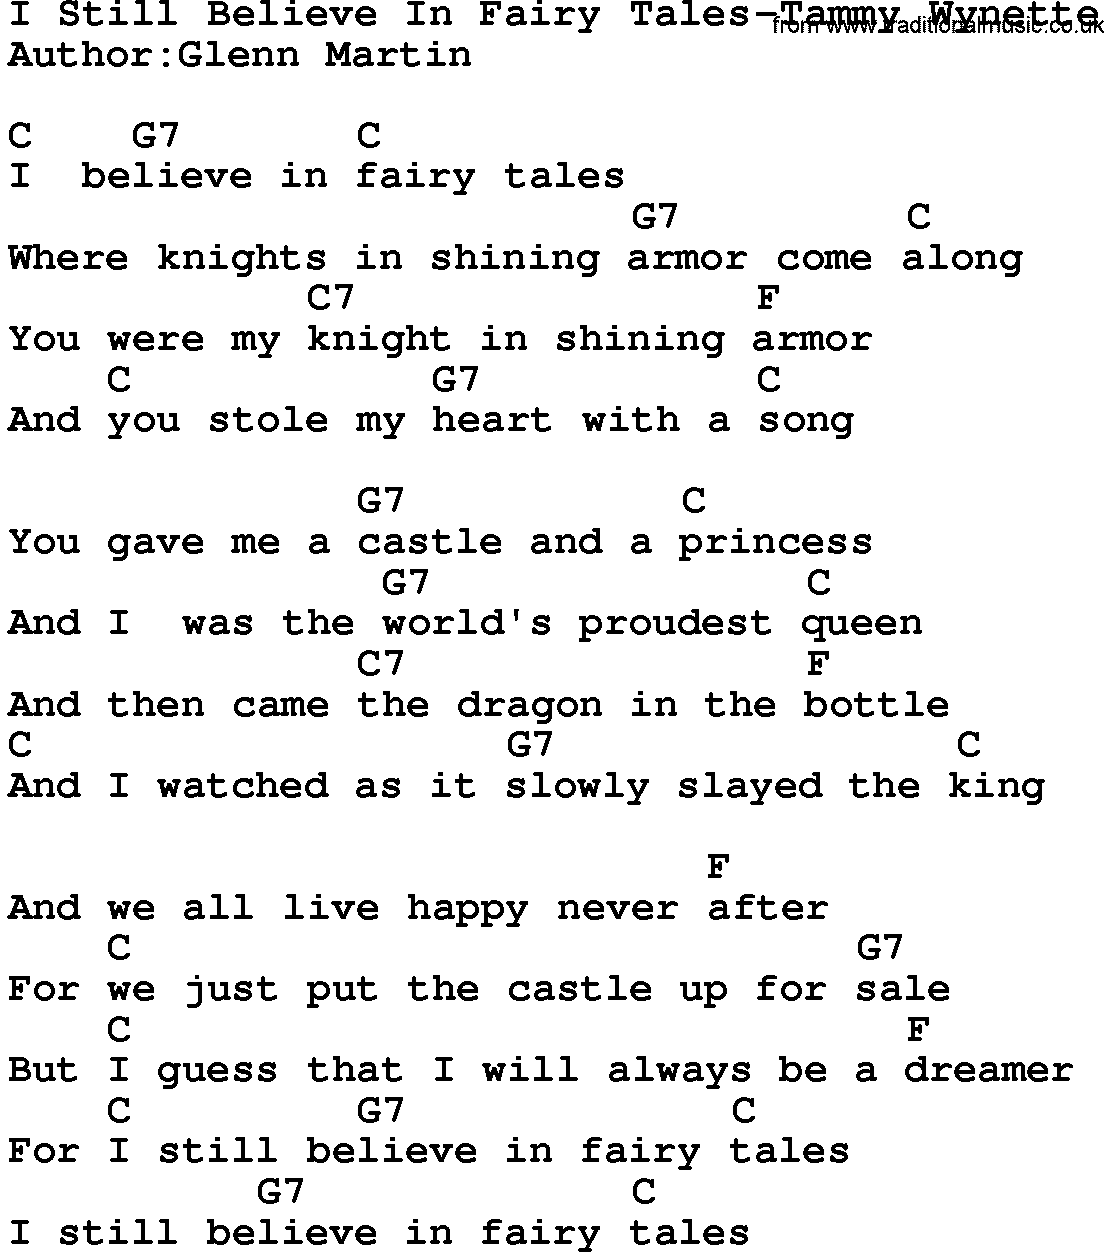 Country music song: I Still Believe In Fairy Tales-Tammy Wynette lyrics and chords